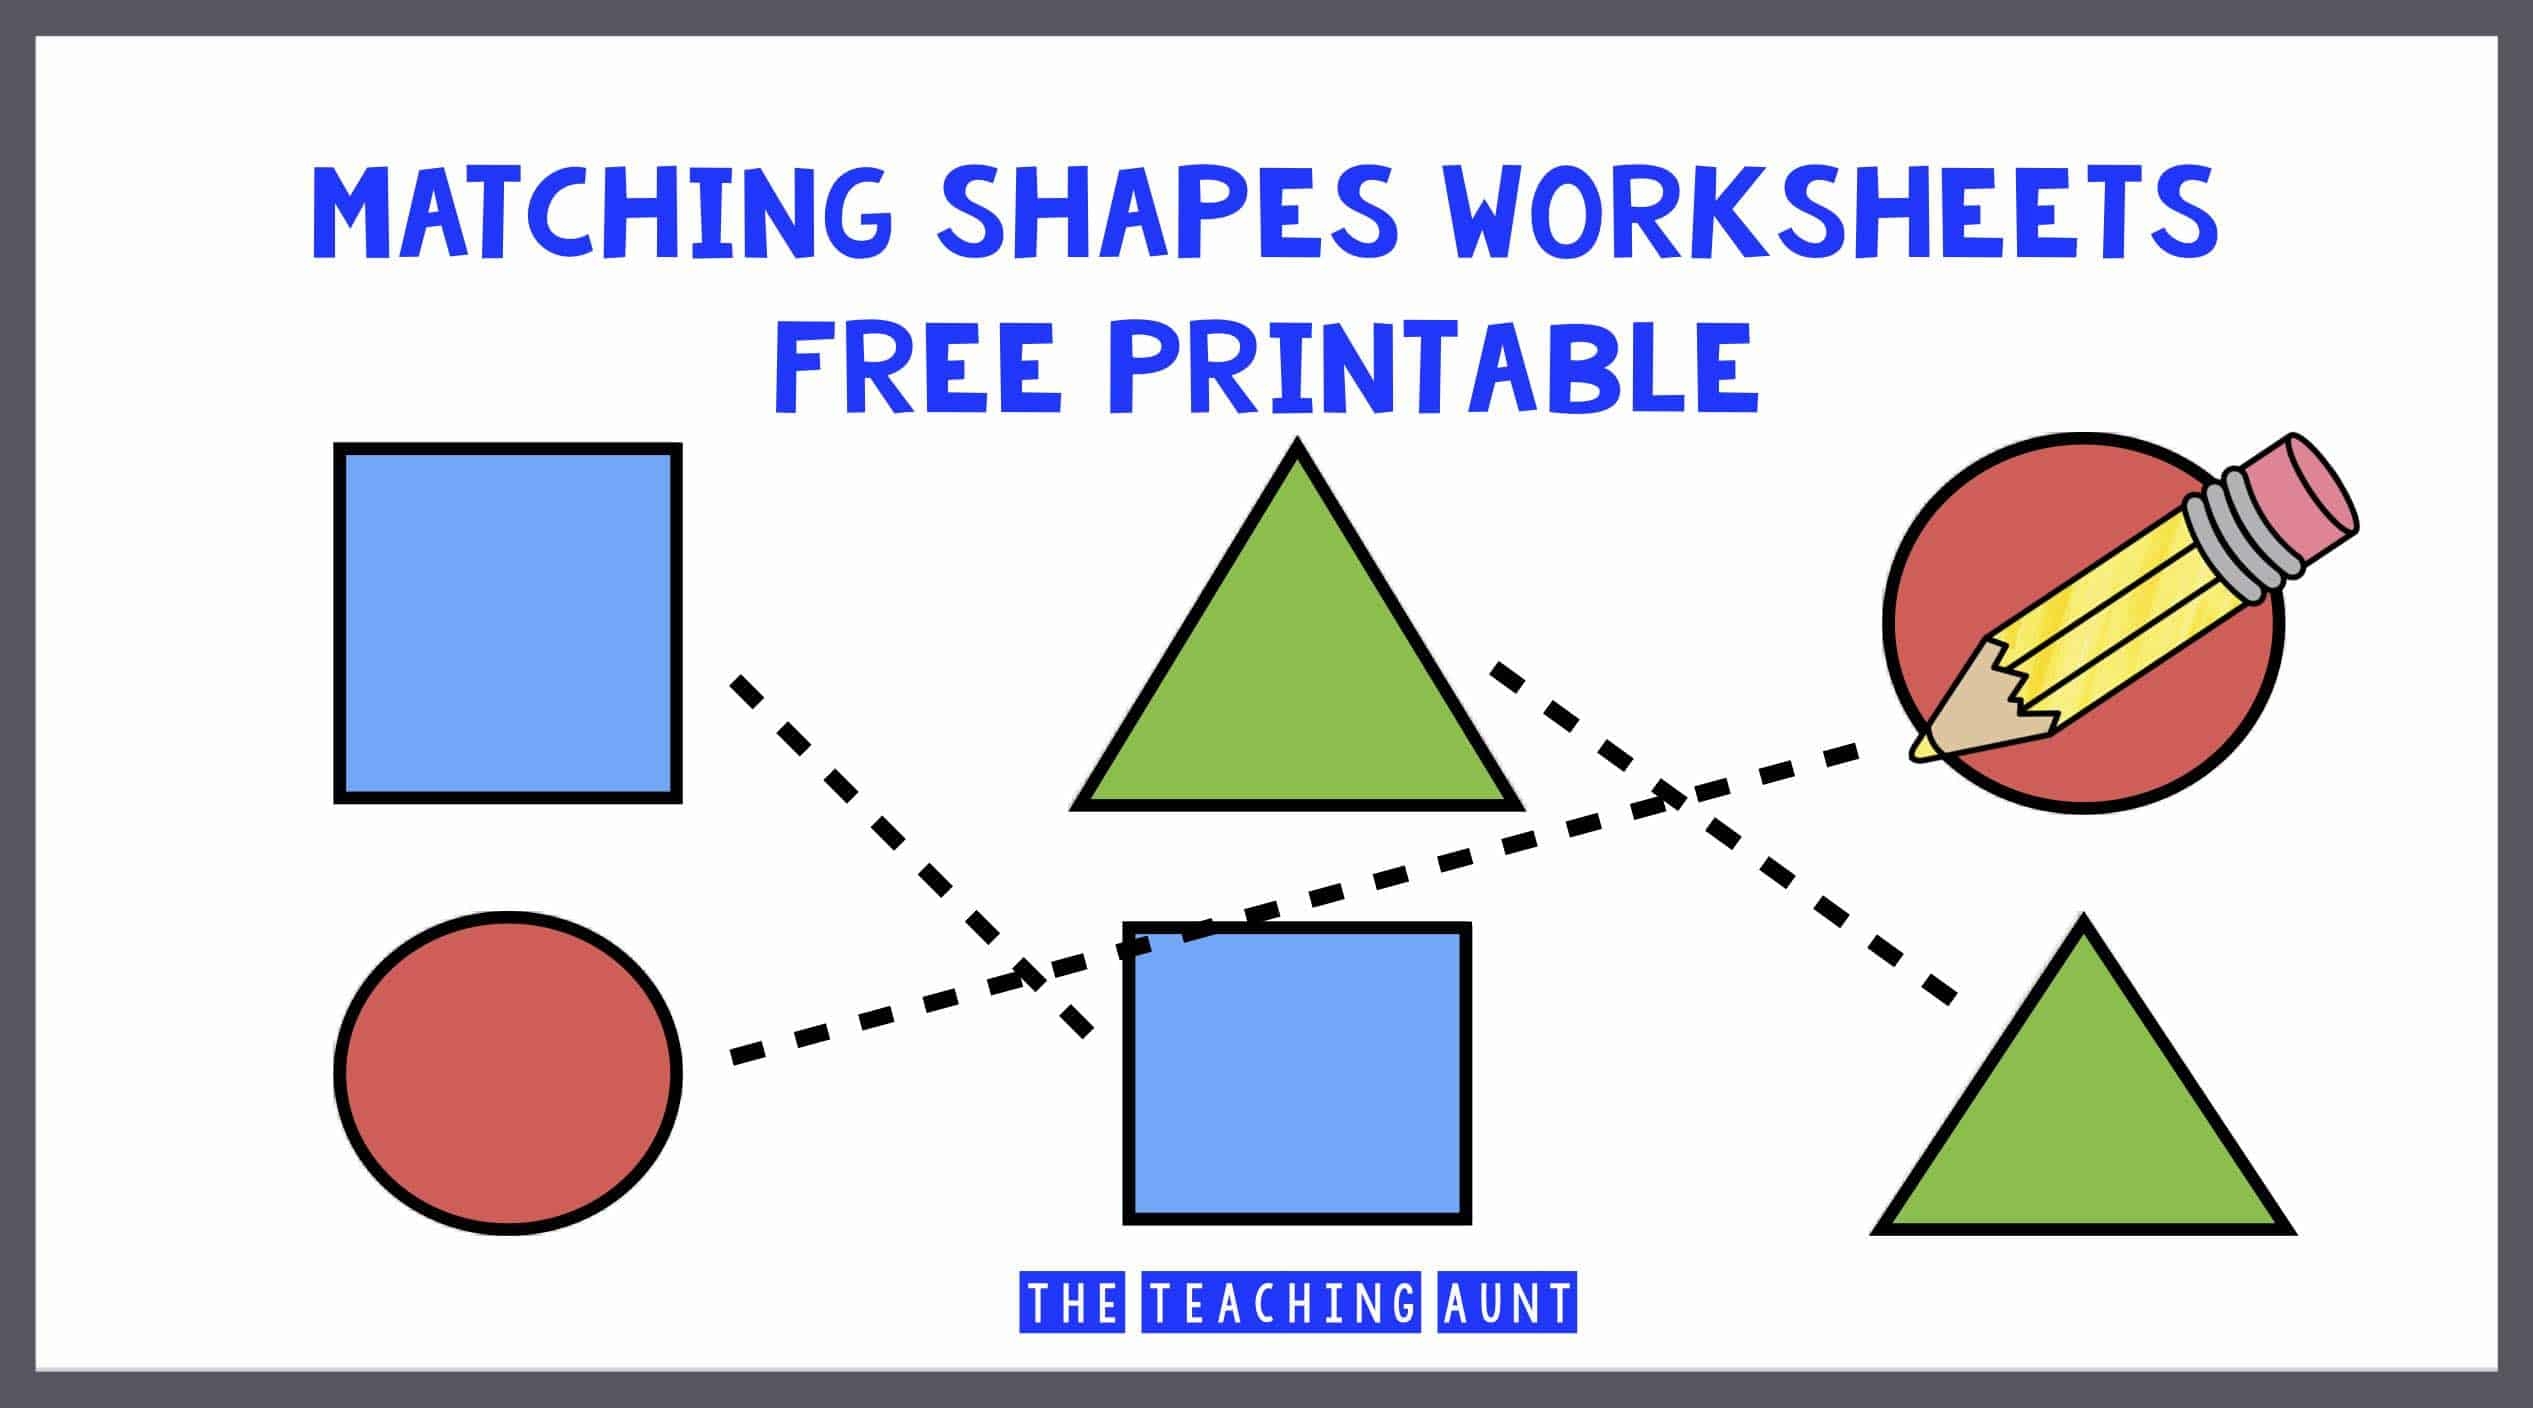 Matching Shapes Worksheets The Teaching Aunt